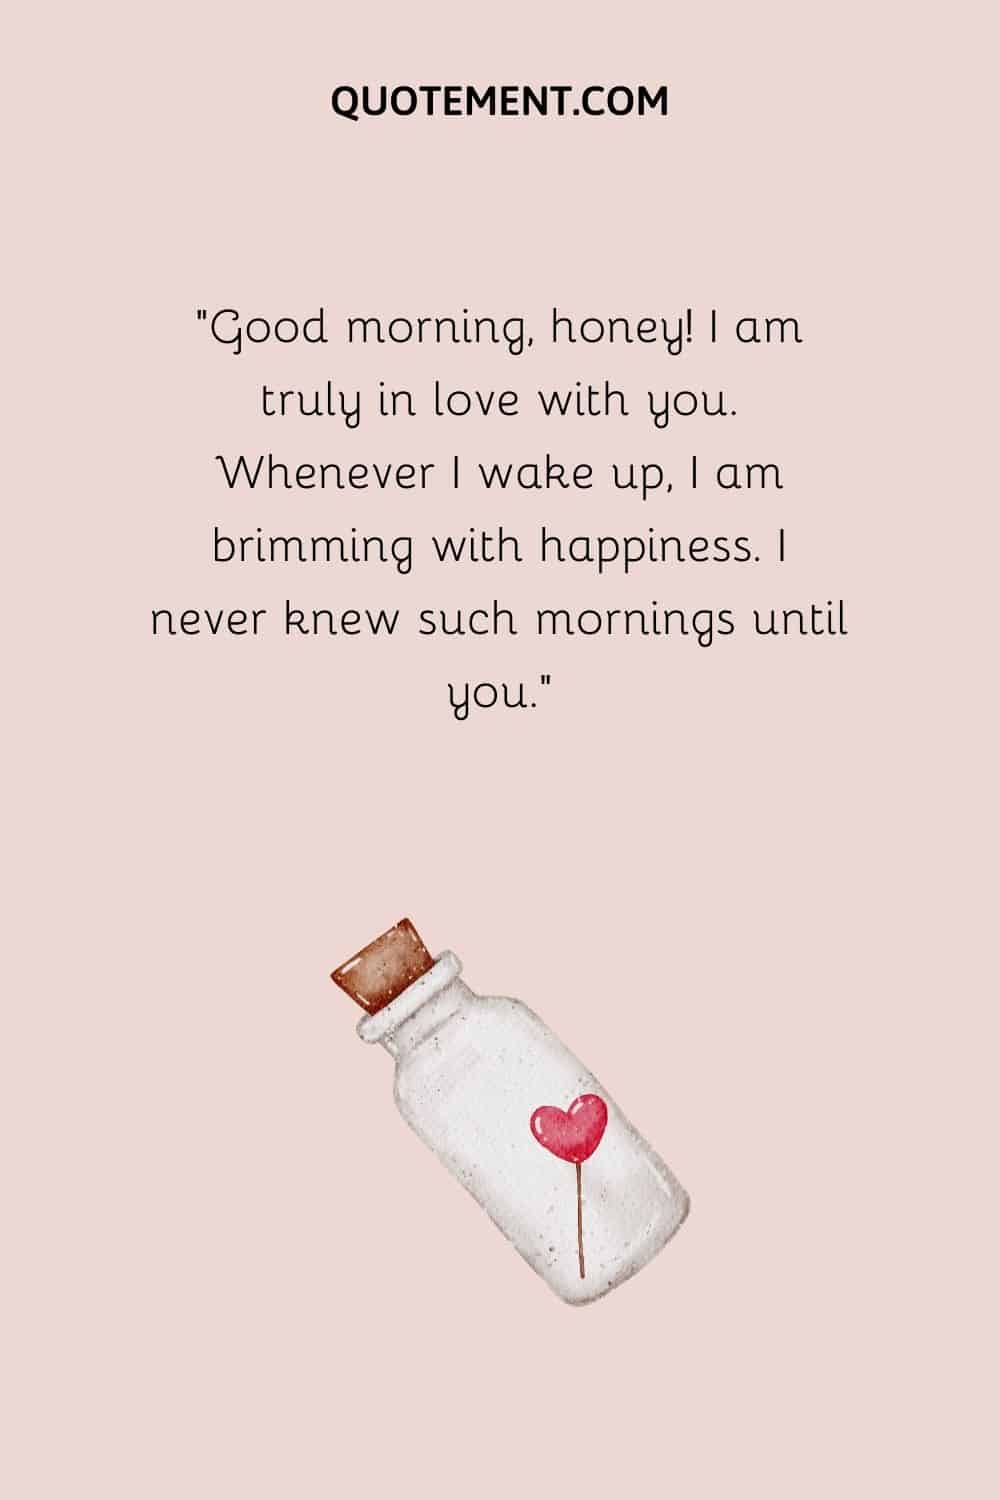 “Good morning, honey! I am truly in love with you. Whenever I wake up, I am brimming with happiness. I never knew such mornings until you.”